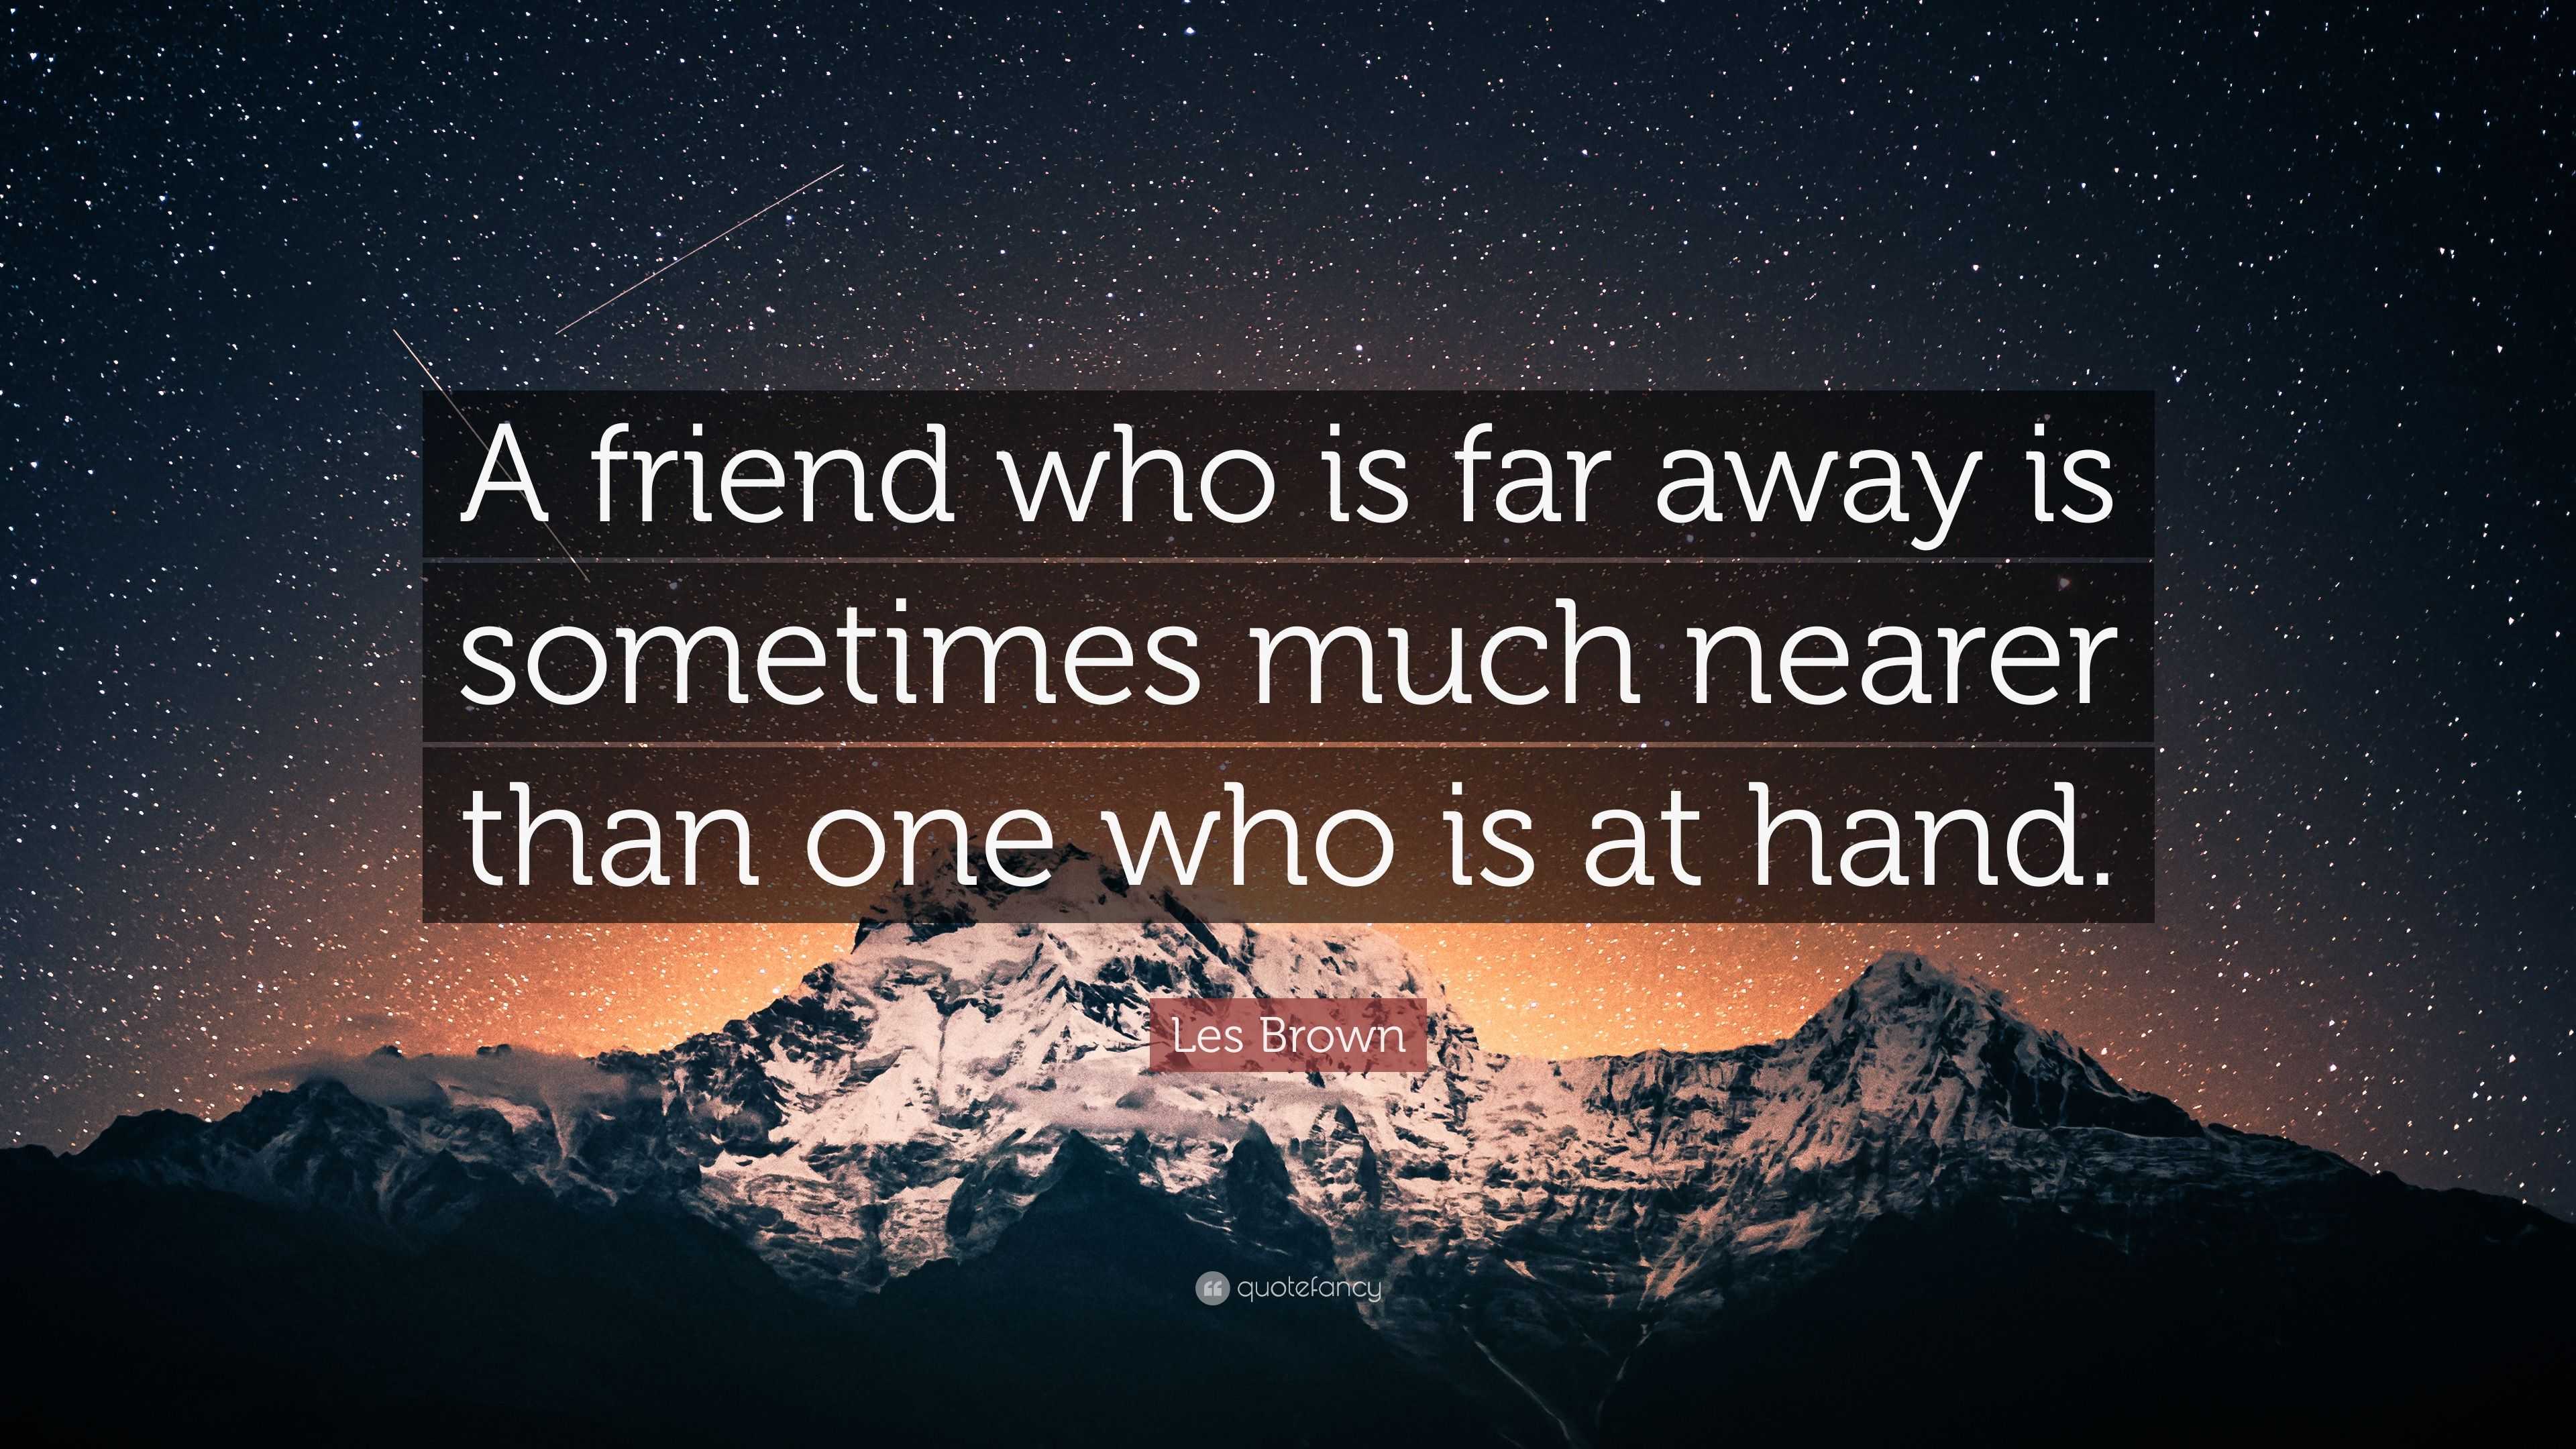 Les Brown Quote: “A friend who is far away is sometimes much nearer